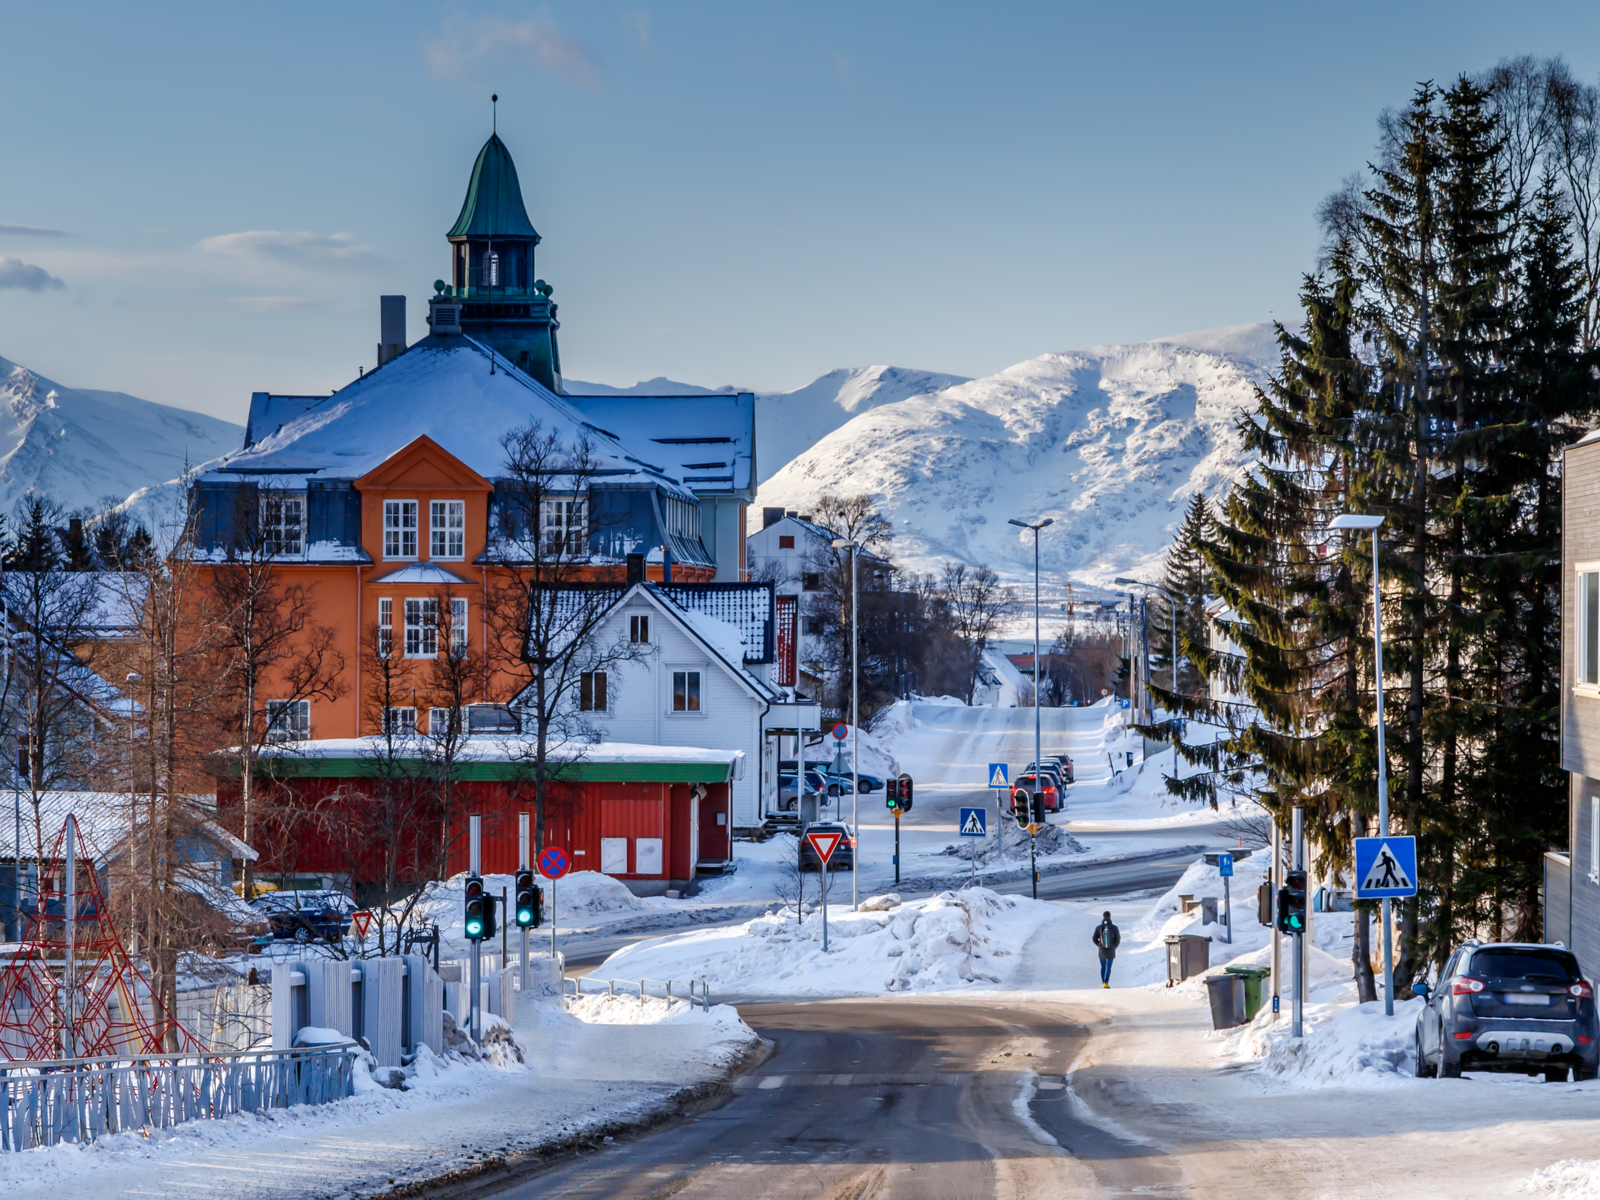 The city of Tromso pictured during the worst time to visit Norway with snow covering the streets and roofs